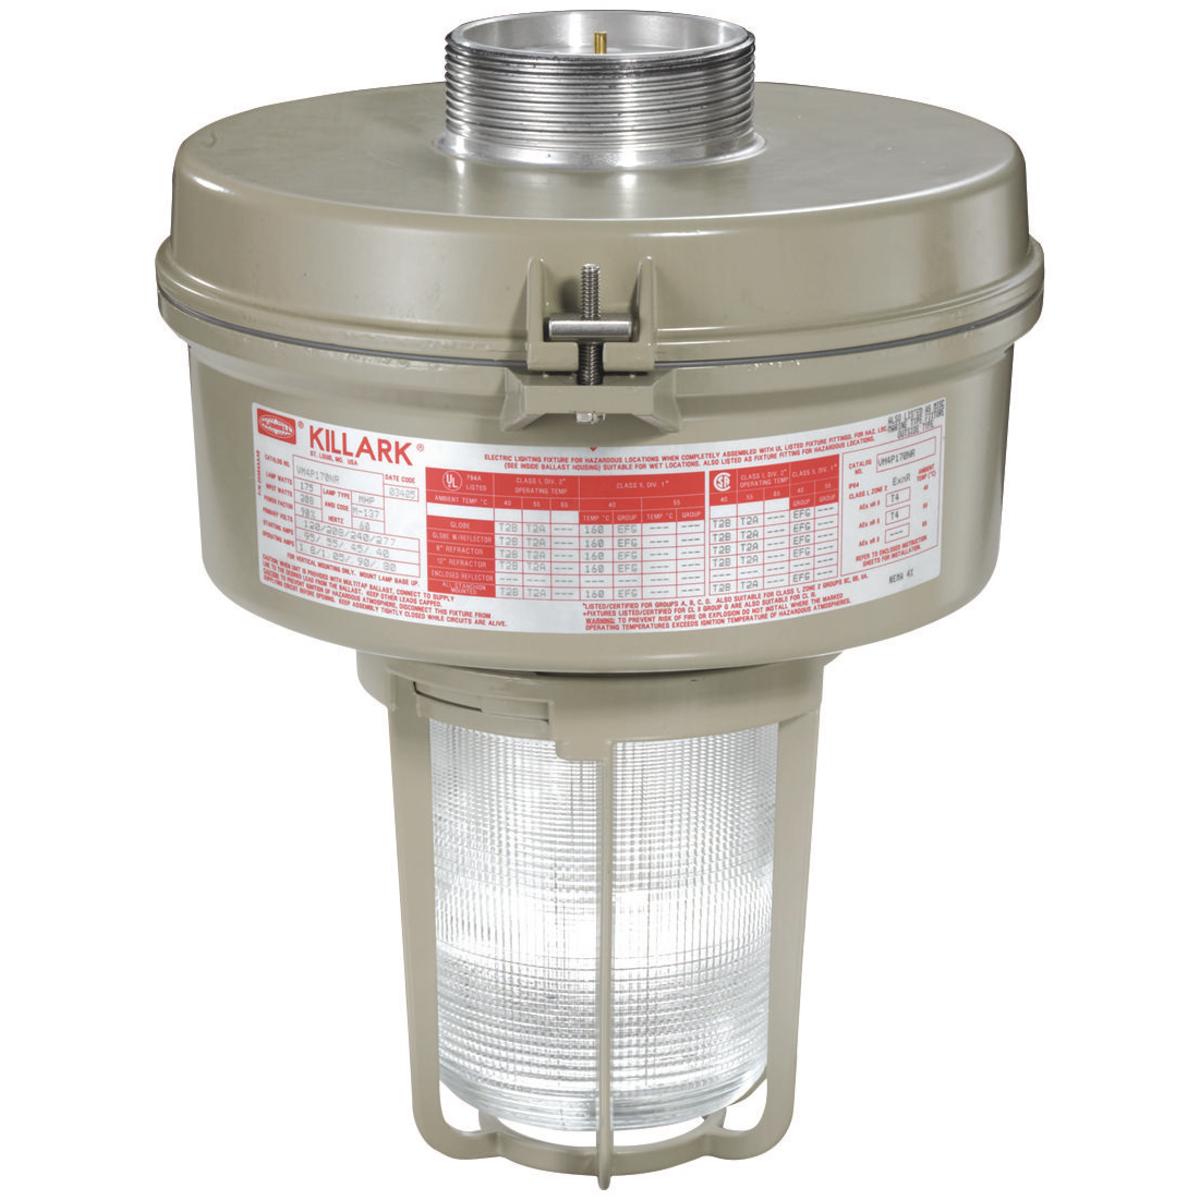 Hubbell VM3S105EZGLG VM3 Series - 100W High Pressure Sodium 480V - EZ Mount Adapter -  Globe and Guard  ; Ballast tank and splice box – corrosion resistant copper-free aluminum alloy with baked powder epoxy/polyester finish, electrostatically applied for complete, uniform cor